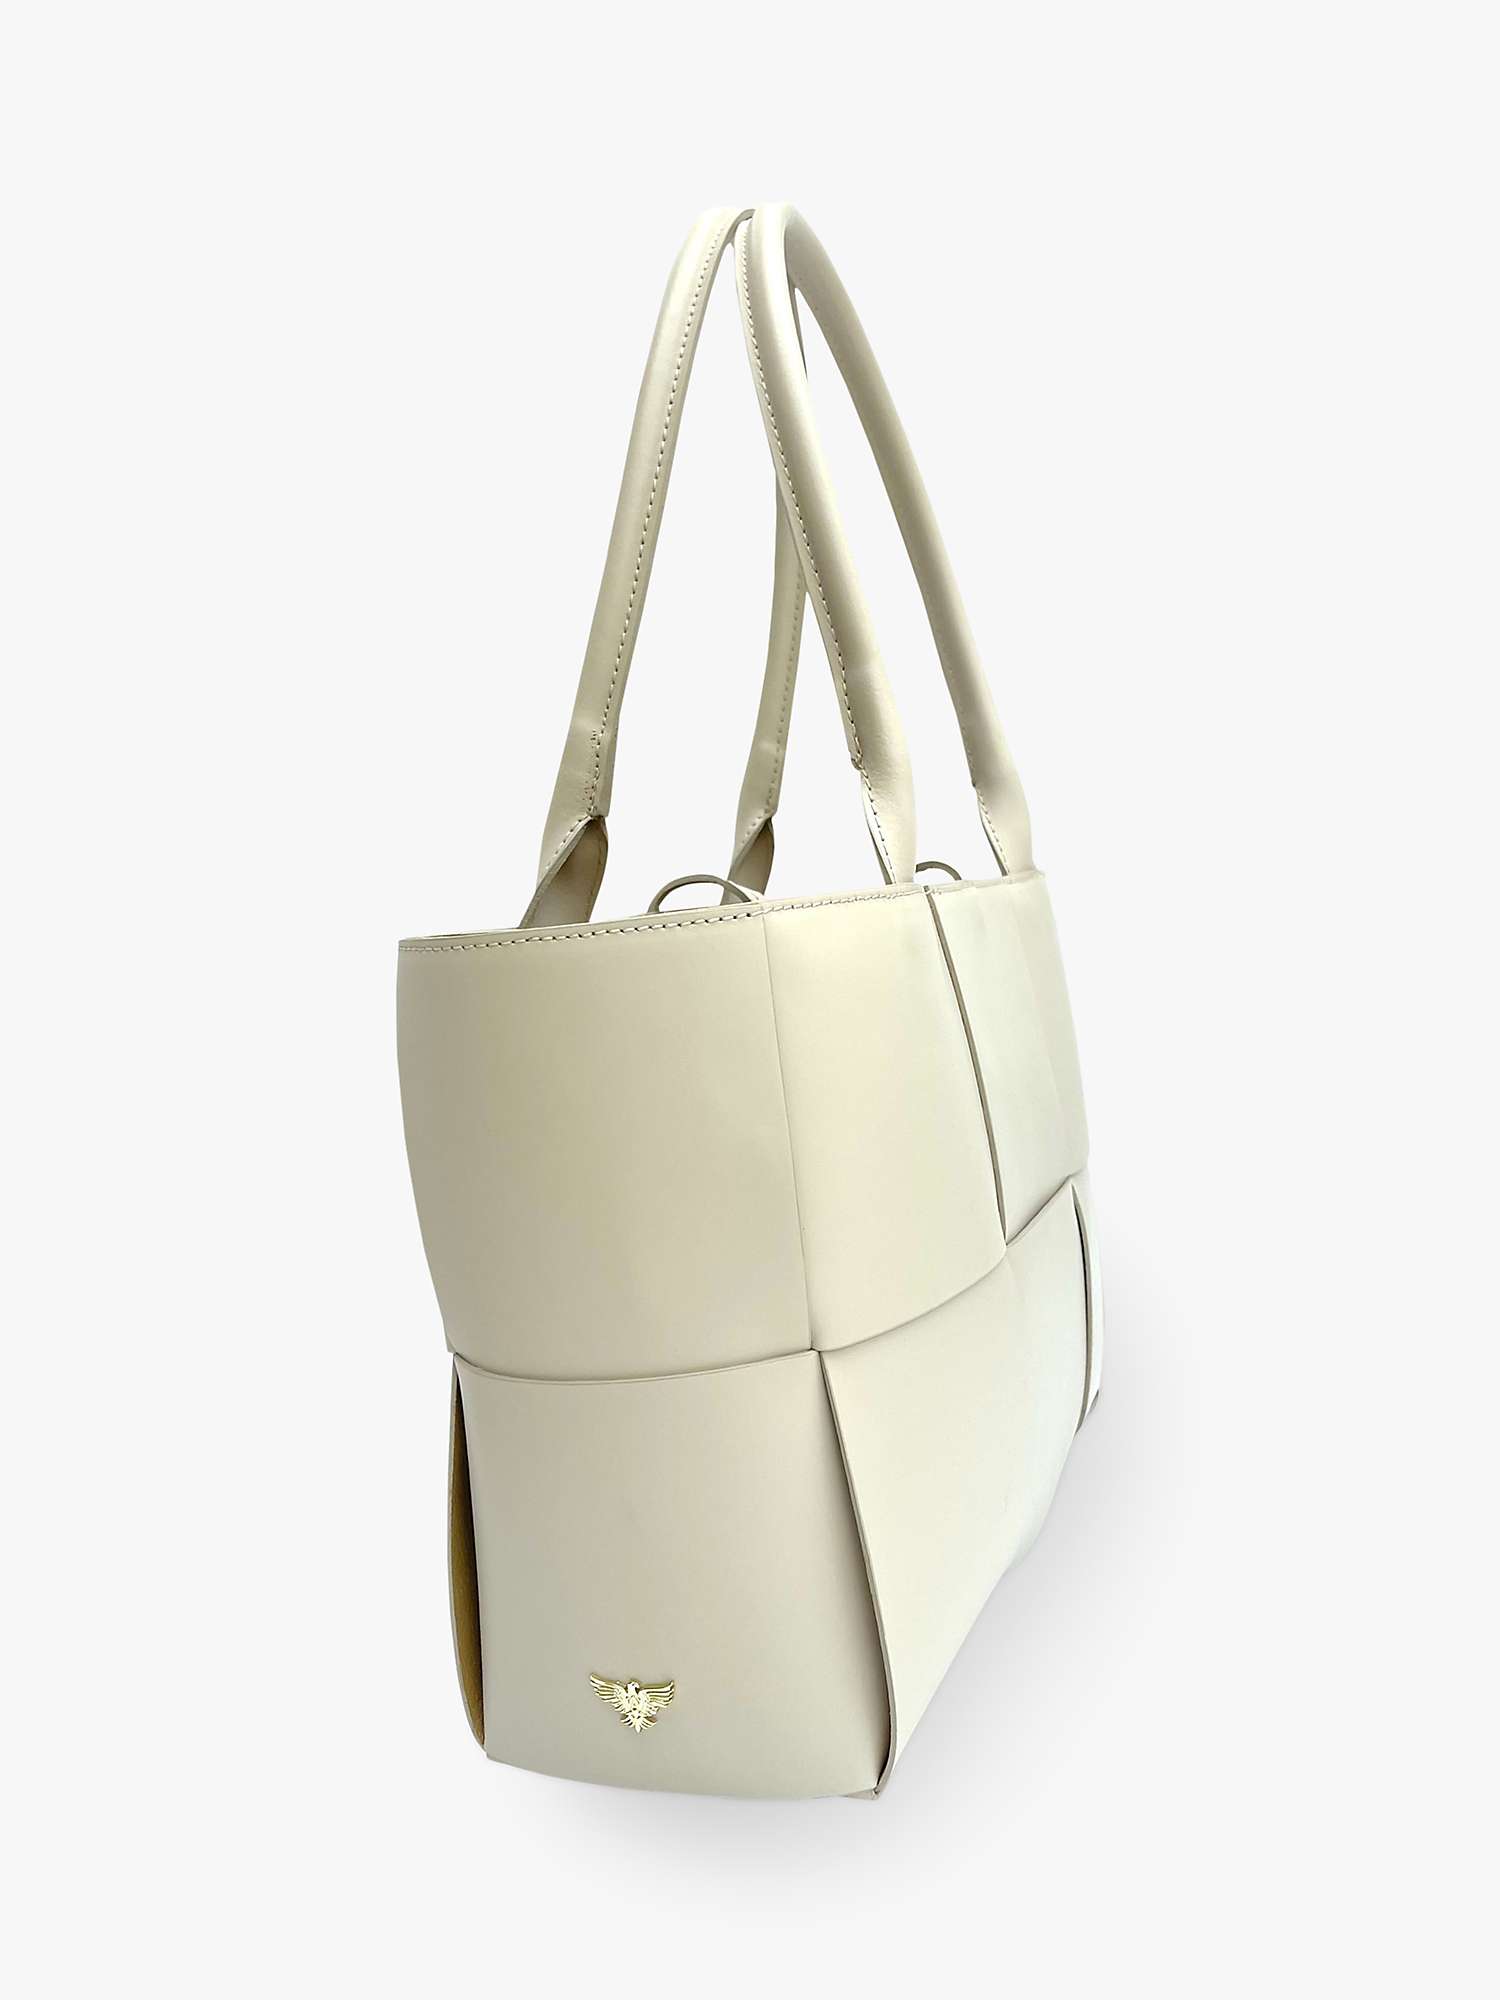 Buy Apatchy The Tori Leather Tote Bag Online at johnlewis.com